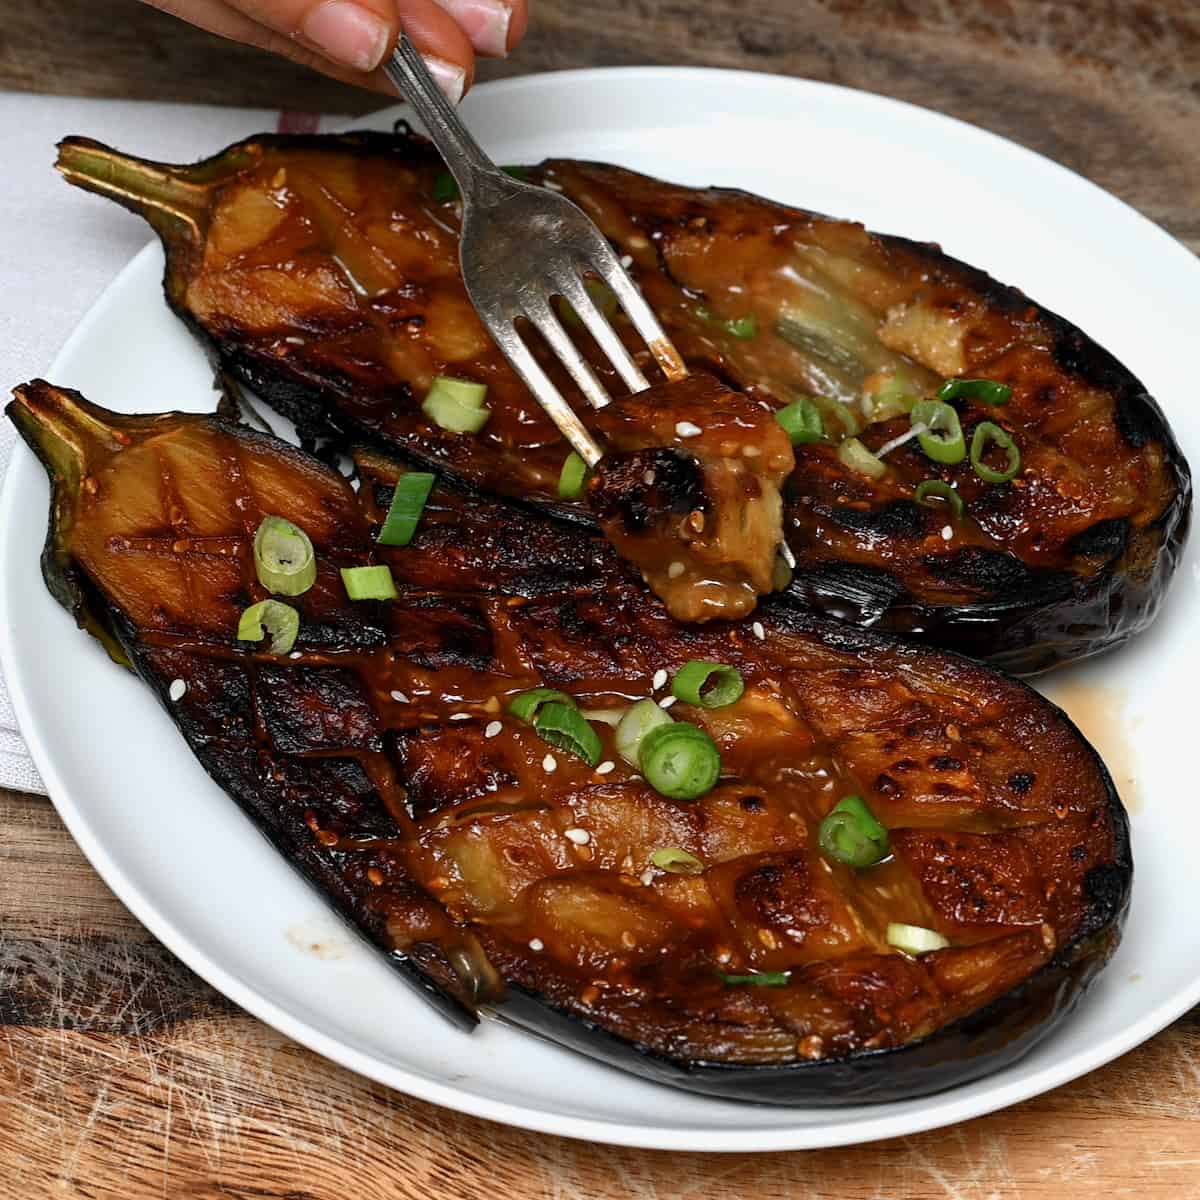 The miso glazes eggplant in a pate garnished with chopped onions and sesame seeds